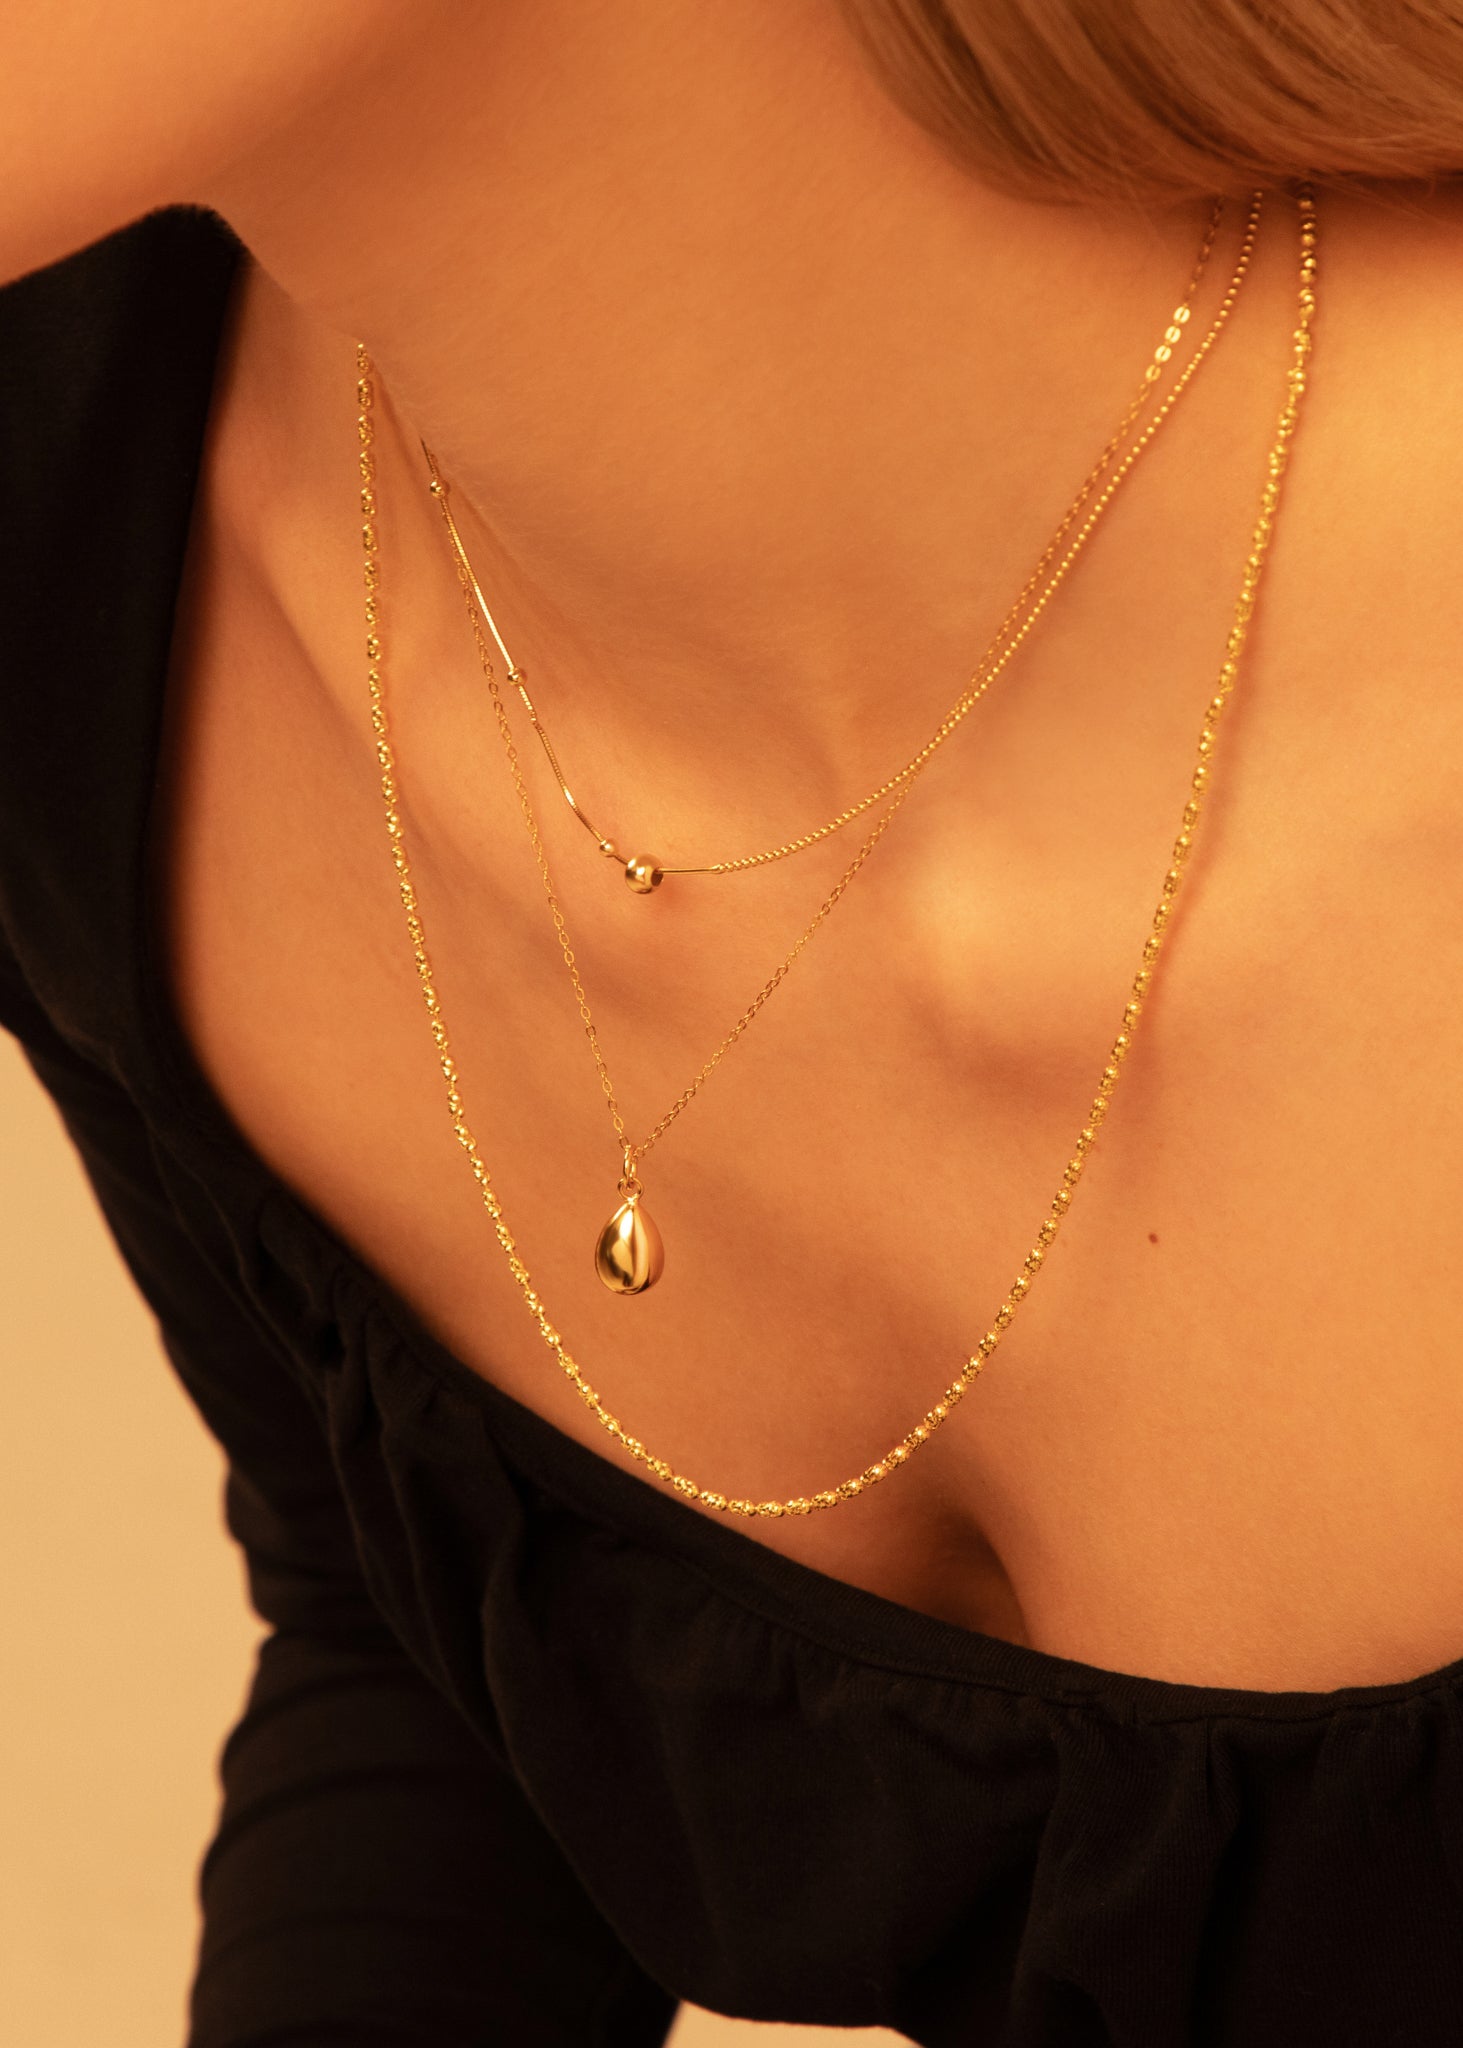 Gold droplets chain